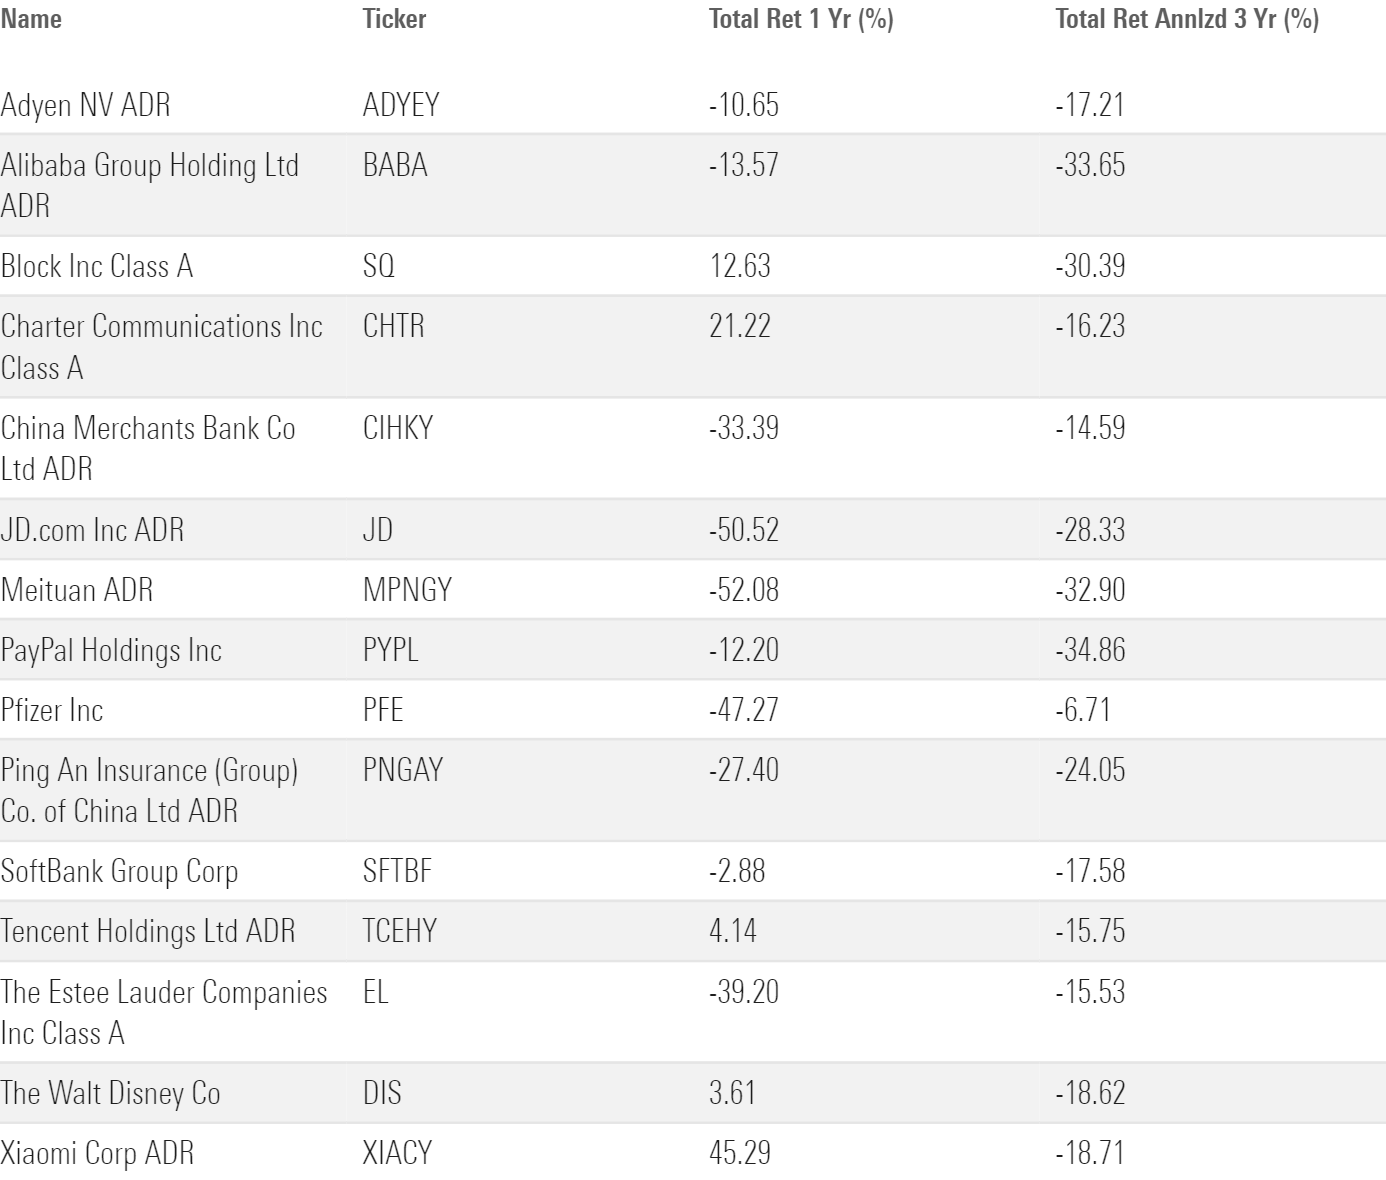 A table showing 15 stocks with negative returns over the past one- and/or three-year periods